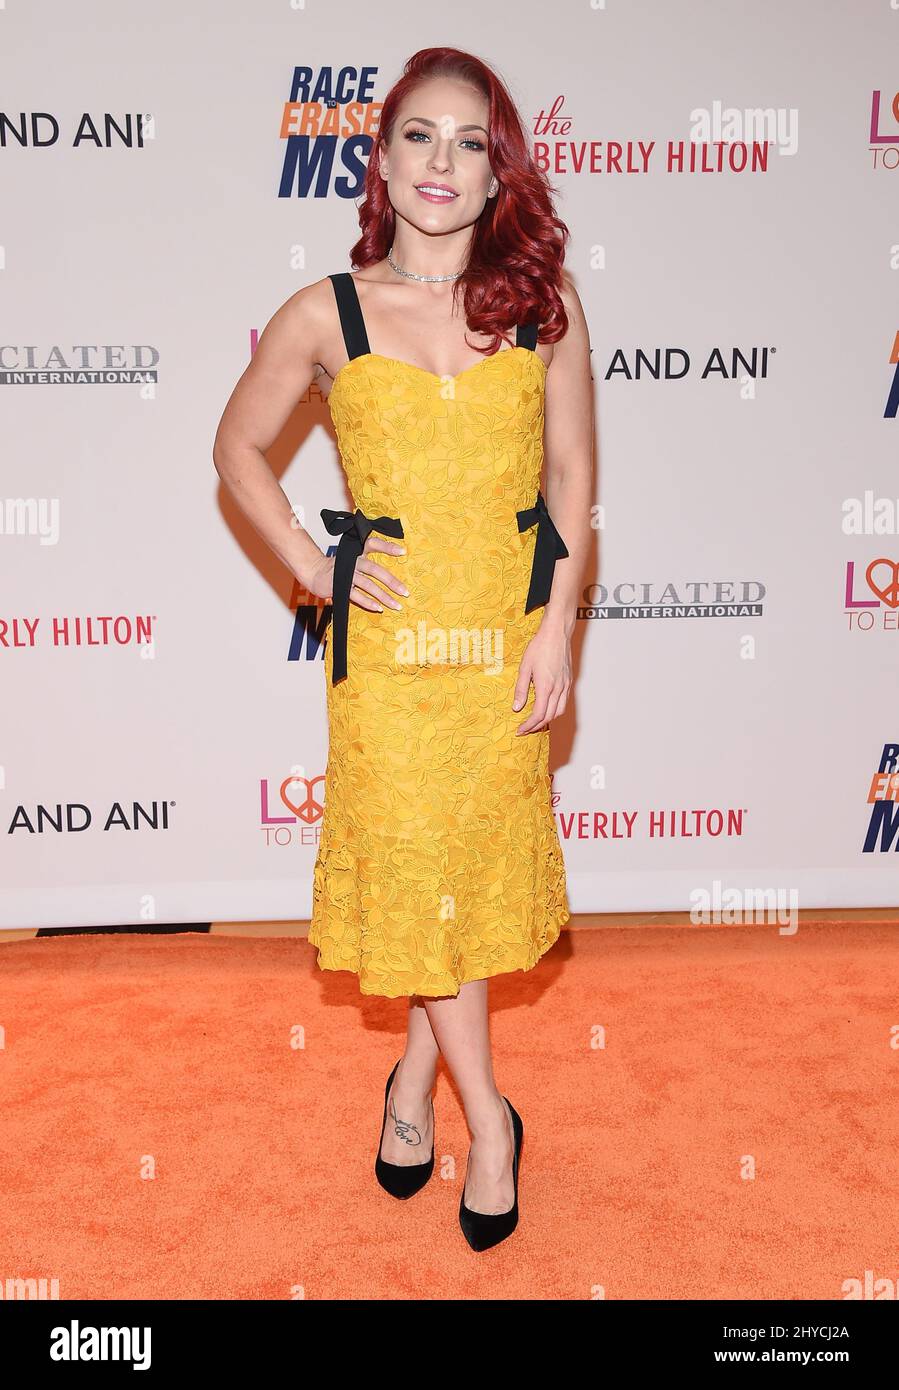 Sharna Burgess arriving to the 24th Annual Race To Erase MG Gala held at the Beverly Hilton Hotel, Beverly Hill, Los Angeles on May 5, 2017 Stock Photo